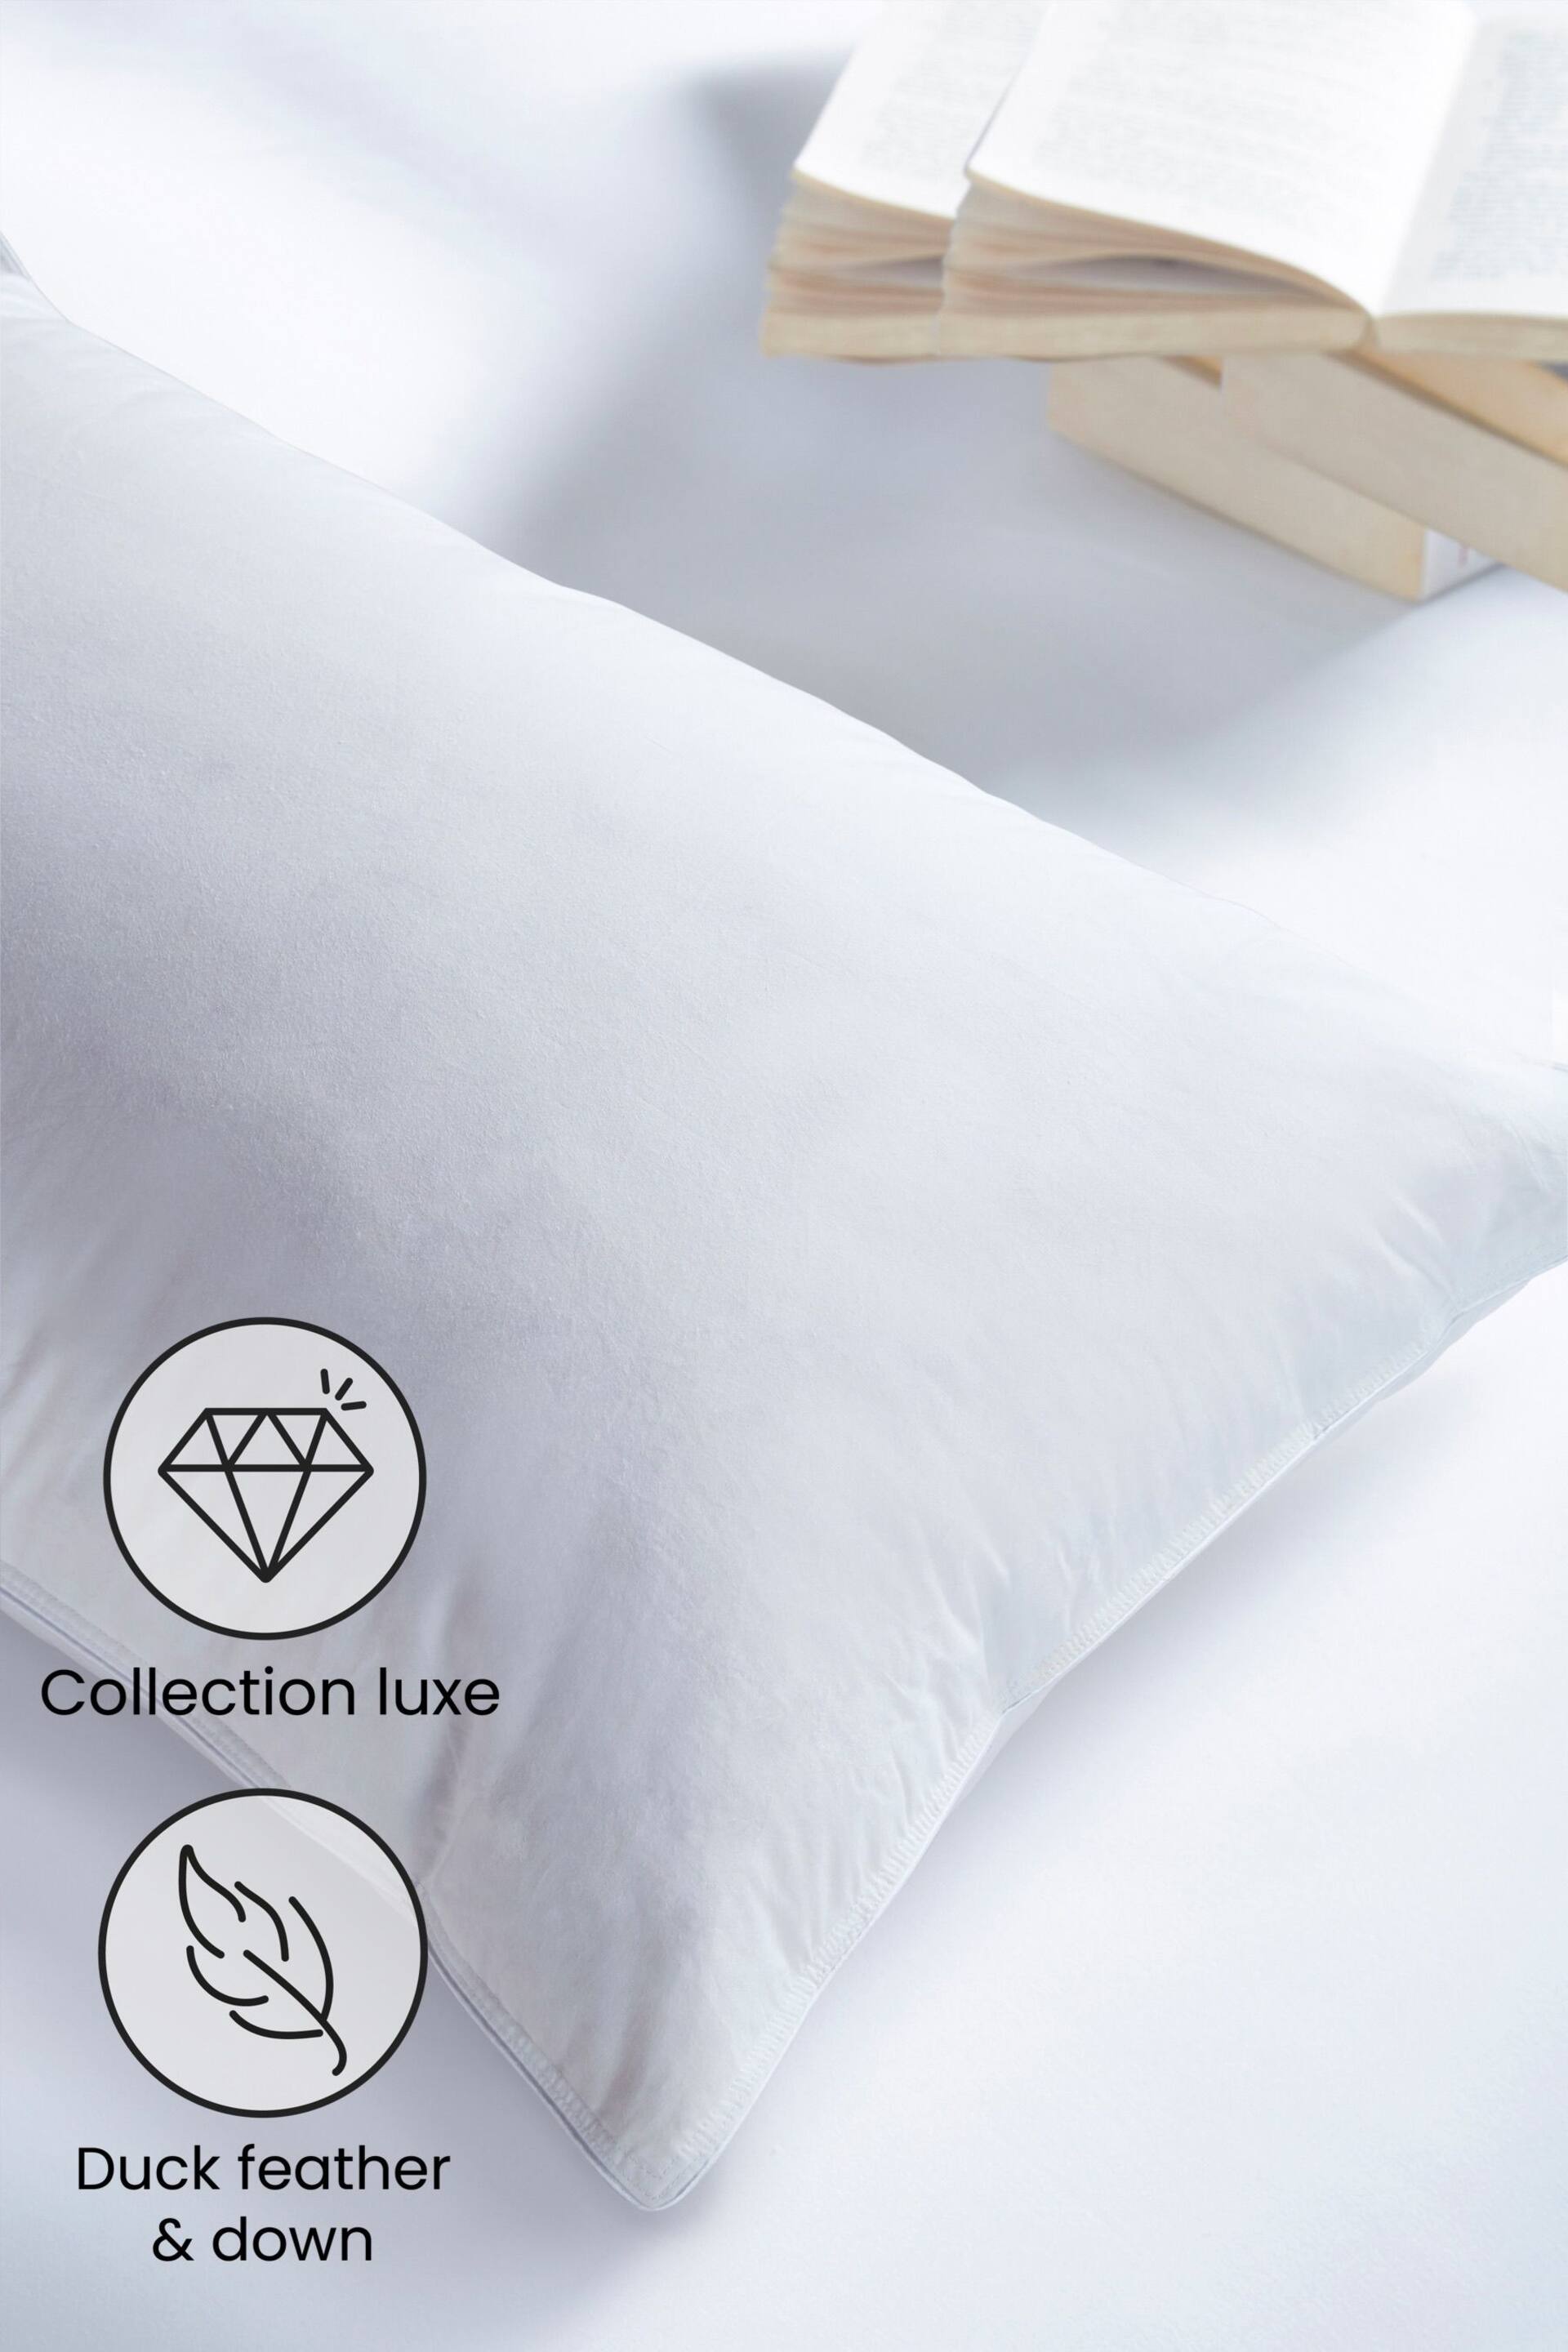 Collection Luxe Duck Down & Feather Support Pillow - Image 2 of 2